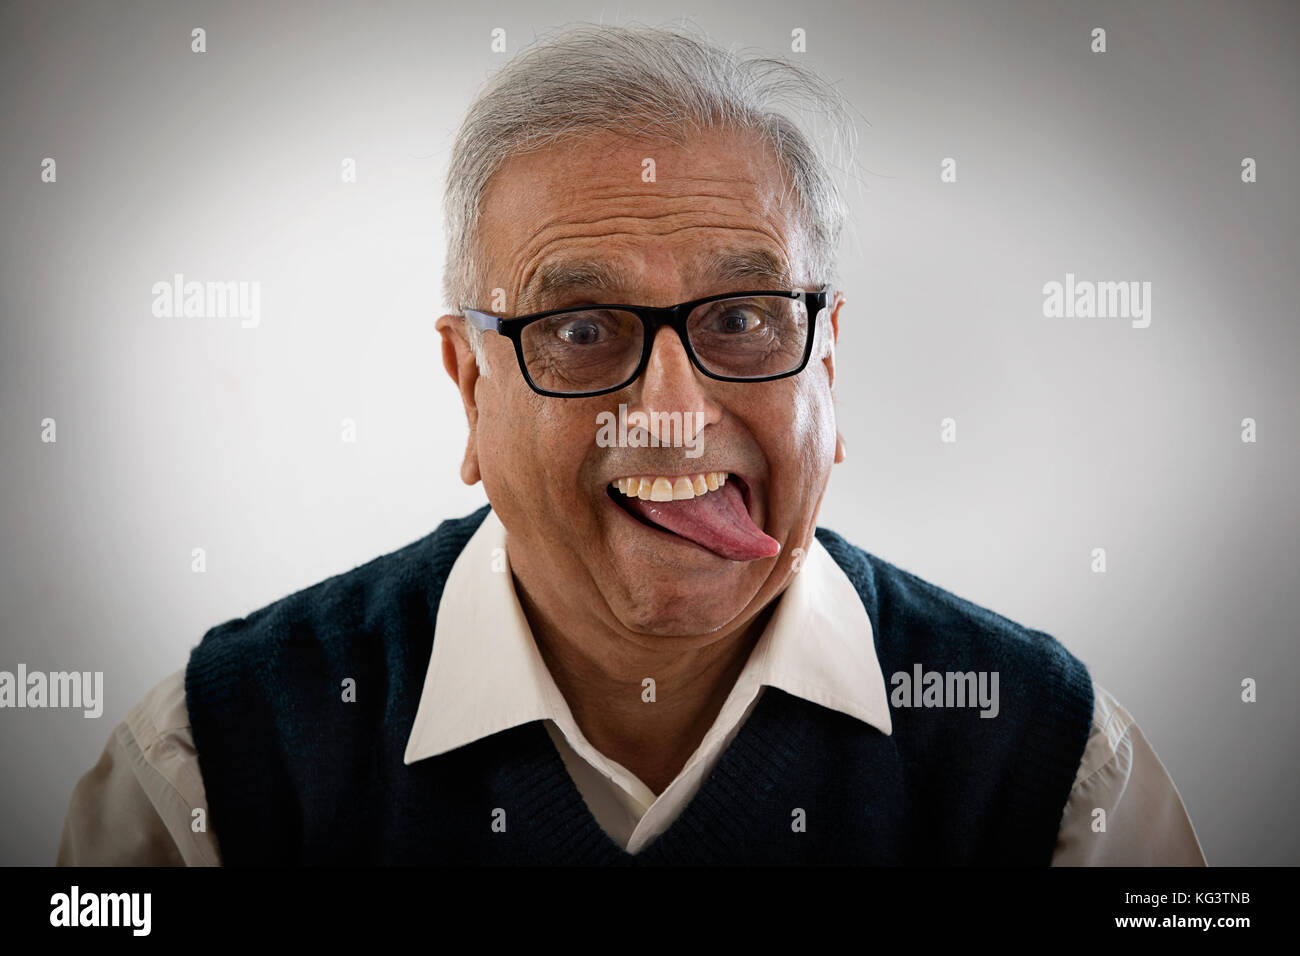 Portrait of an elderly man sticking his tongue out Stock Photo